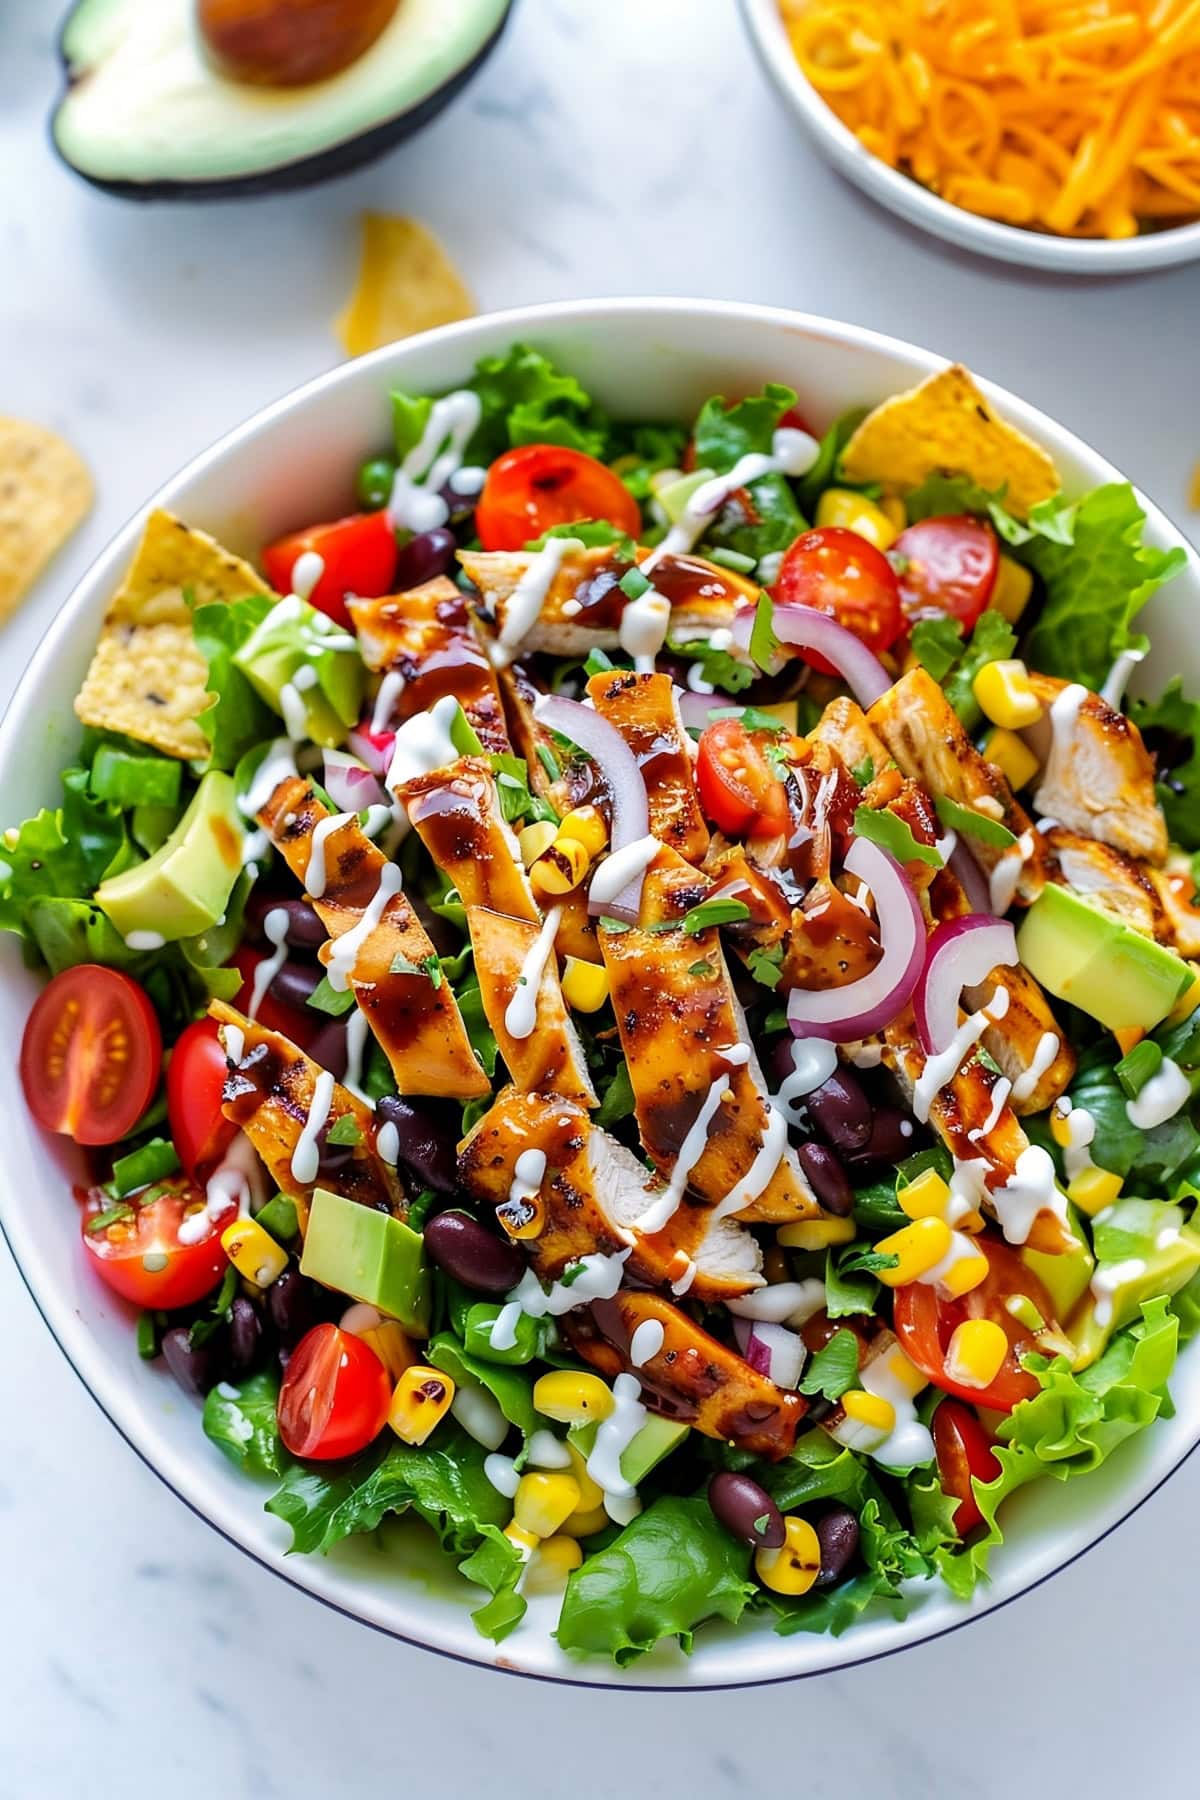 BBQ chicken salad with vibrant ingredients including black beans, corn, and shredded cheddar cheese.